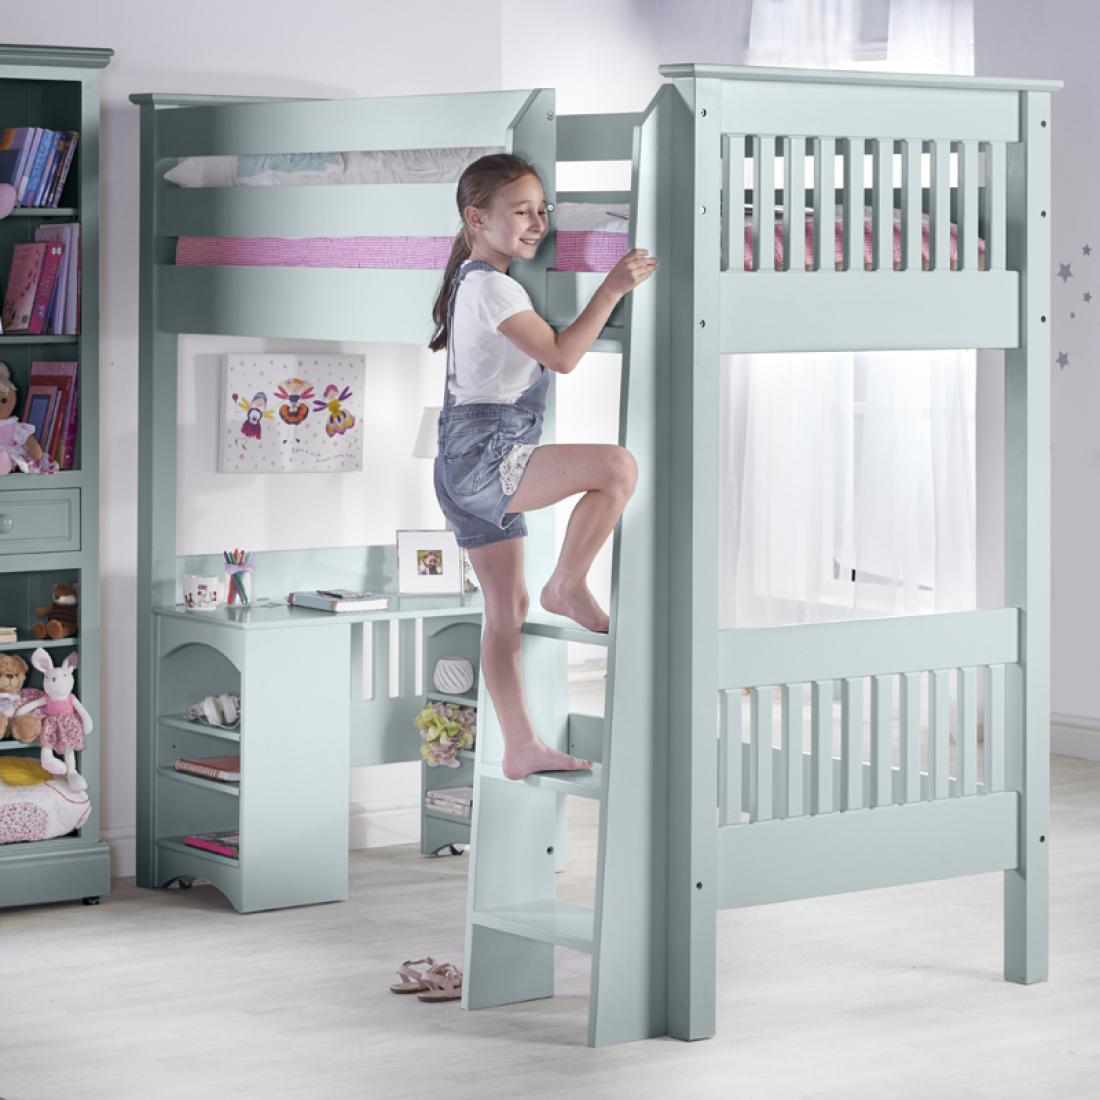 high beds for kids